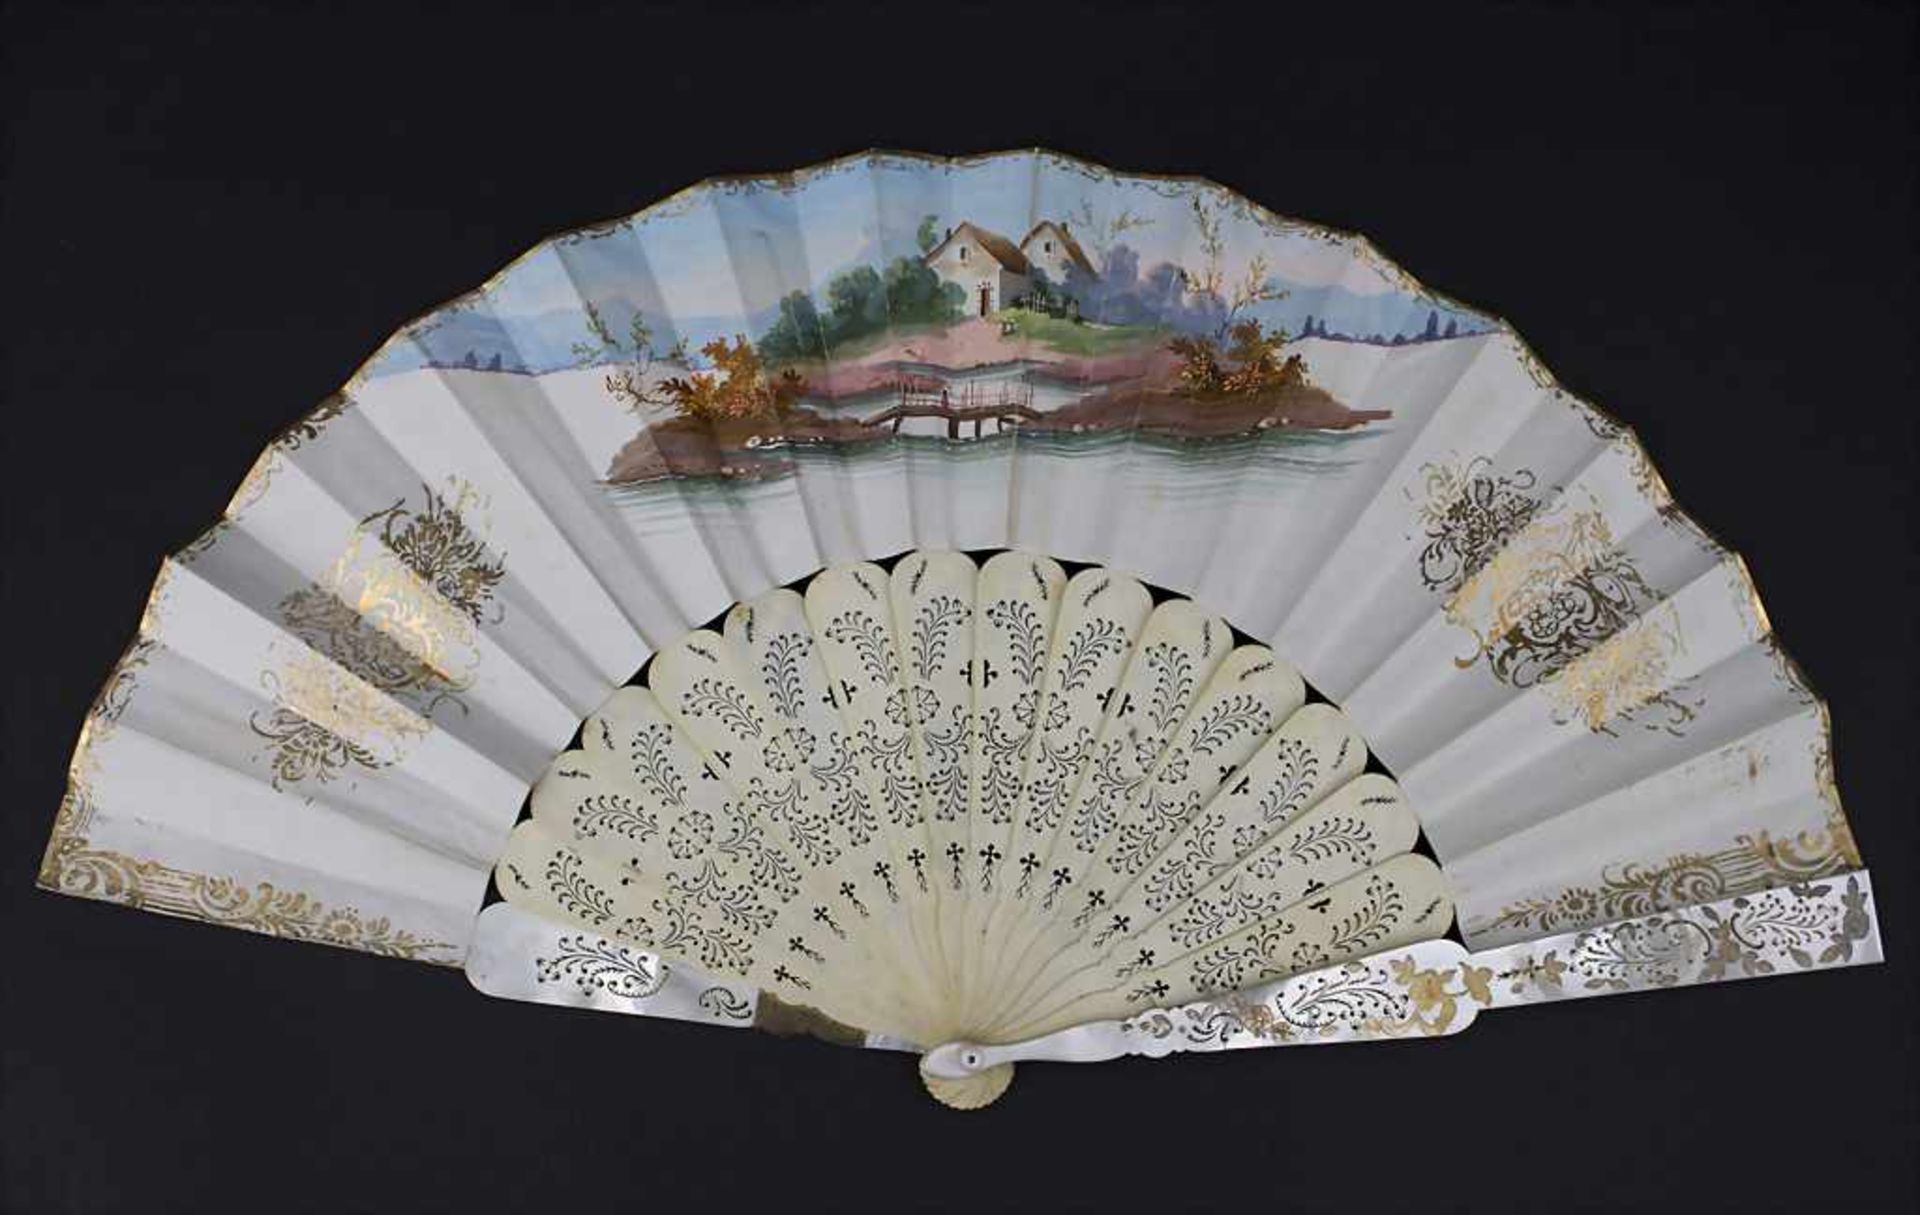 Fächer mit galanter Szene / A fan with galant scenery, 19. Jh.< - Image 5 of 8